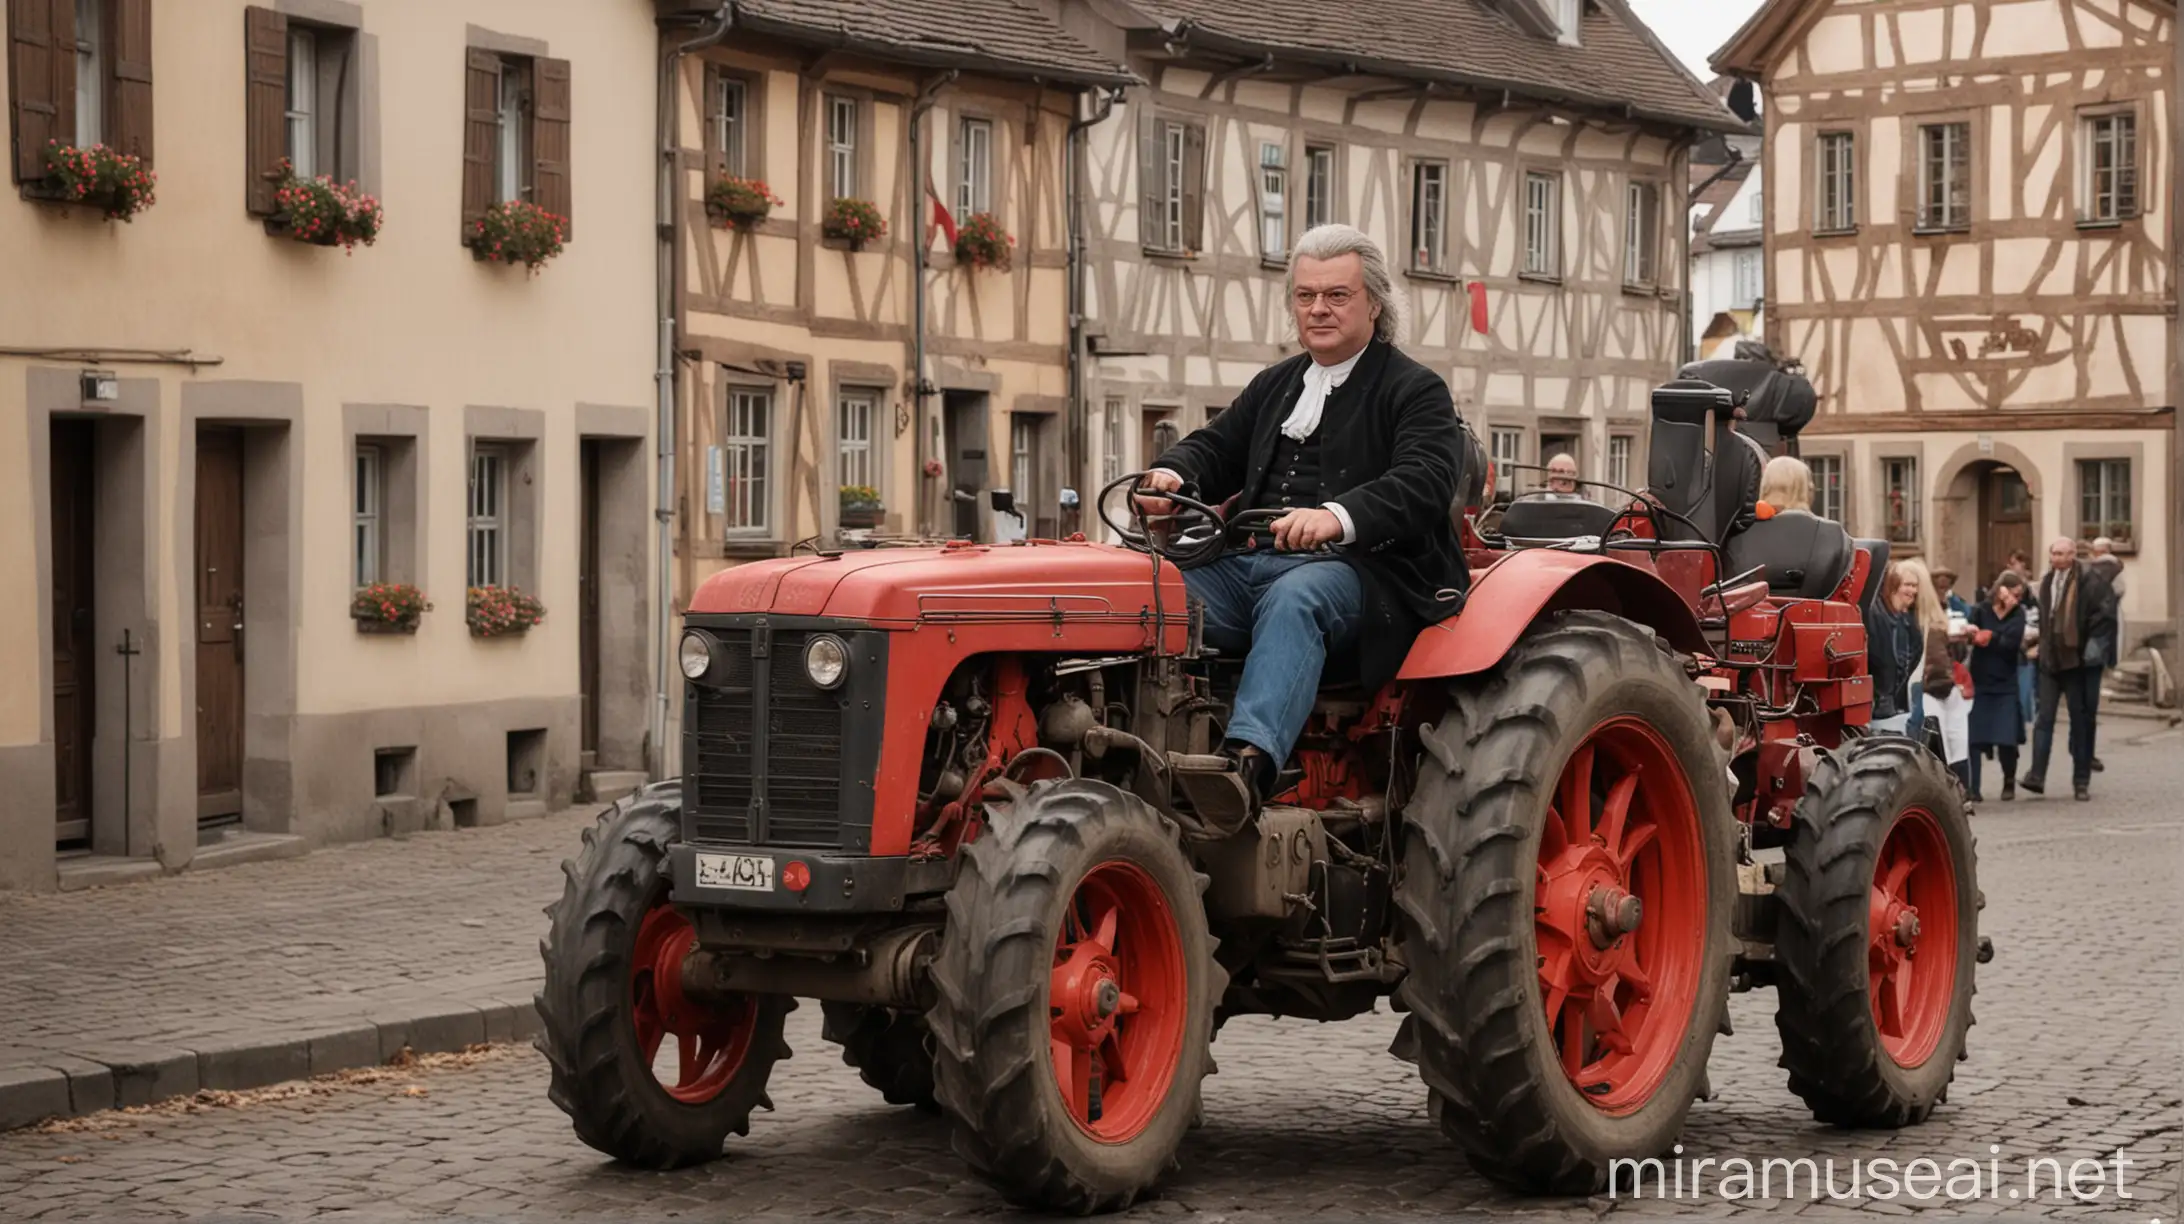 Johann Sebastian Bach driving a tractor in the streets of a German town